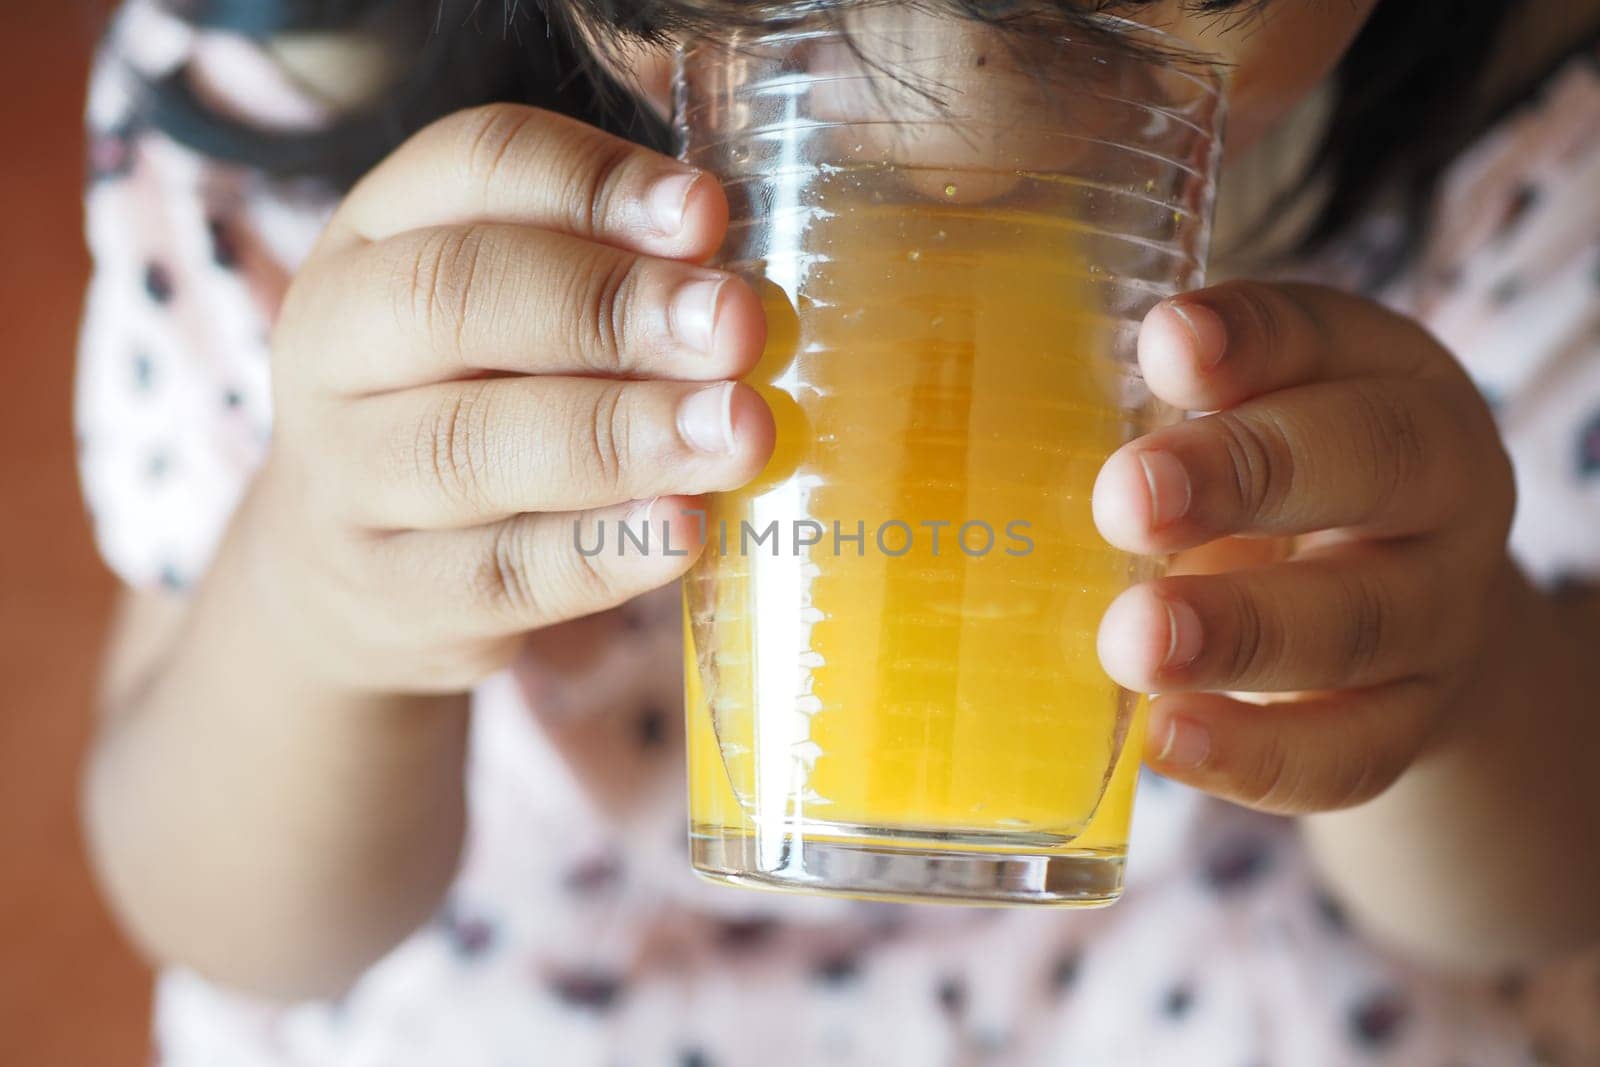 child hand holding a glass of orange juice by towfiq007